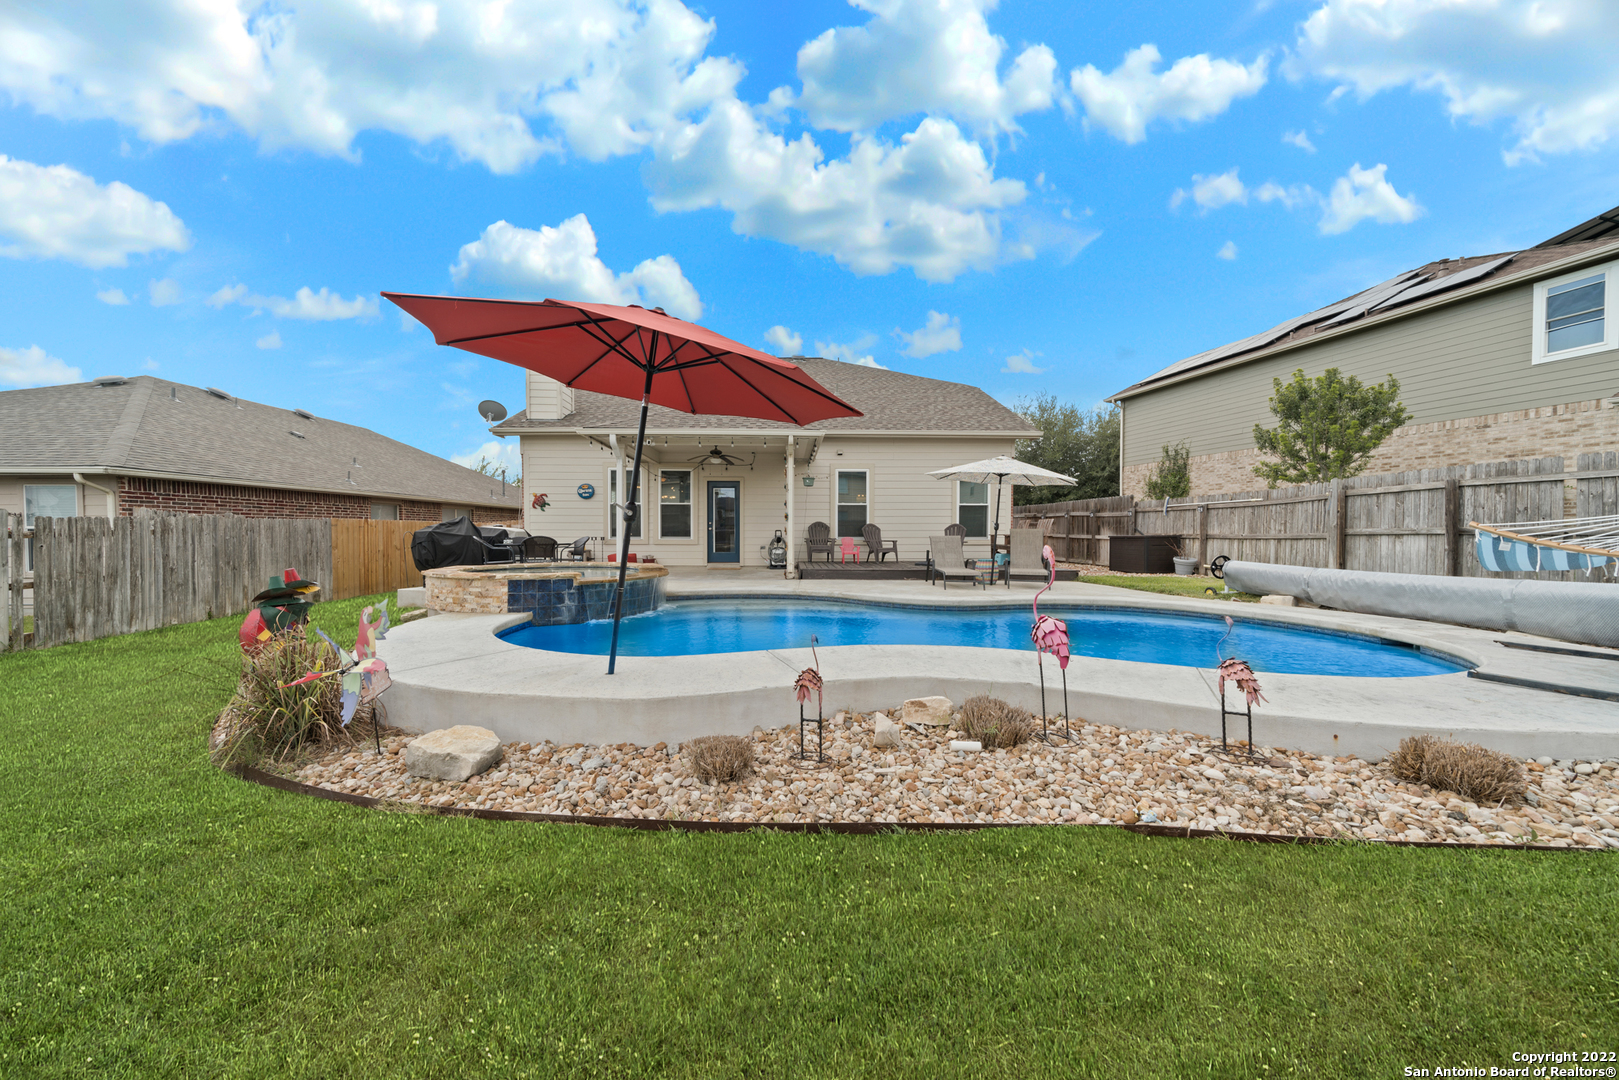 Pool season never ends at this New Braunfels gem with its NEW HEATED POOL & SPA that opened for endless water fun 4th of July 2021! You'll want to spend all your time outside under the covered patio or on the extended deck grilling--but once you do come inside, there's plenty to love there too! There have been numerous top-of-the-line UPGRADES including: ALL NEW WINDOWS (October 2019), NEW 20-SEER TRANE HVAC (July 2020), NEW ROOF (August 2022), NEW HOT WATER HEATER (December 2019), NEW EXTERIOR DOORS (October 2019)... ask for a copy of the features list for all the fun details on these quality upgrades. Downstairs you'll find a flexible bonus room that could be a formal dining room, study, or second living room; a spacious kitchen with island and gas cooking; a cozy living room with updated fireplace and updated wood laminate flooring; spacious owners suite. Upstairs has 3 large bedrooms surrounding the ultimate loft/game room with a built-in desk.  So much to see-and did we mention HEATED POOL!